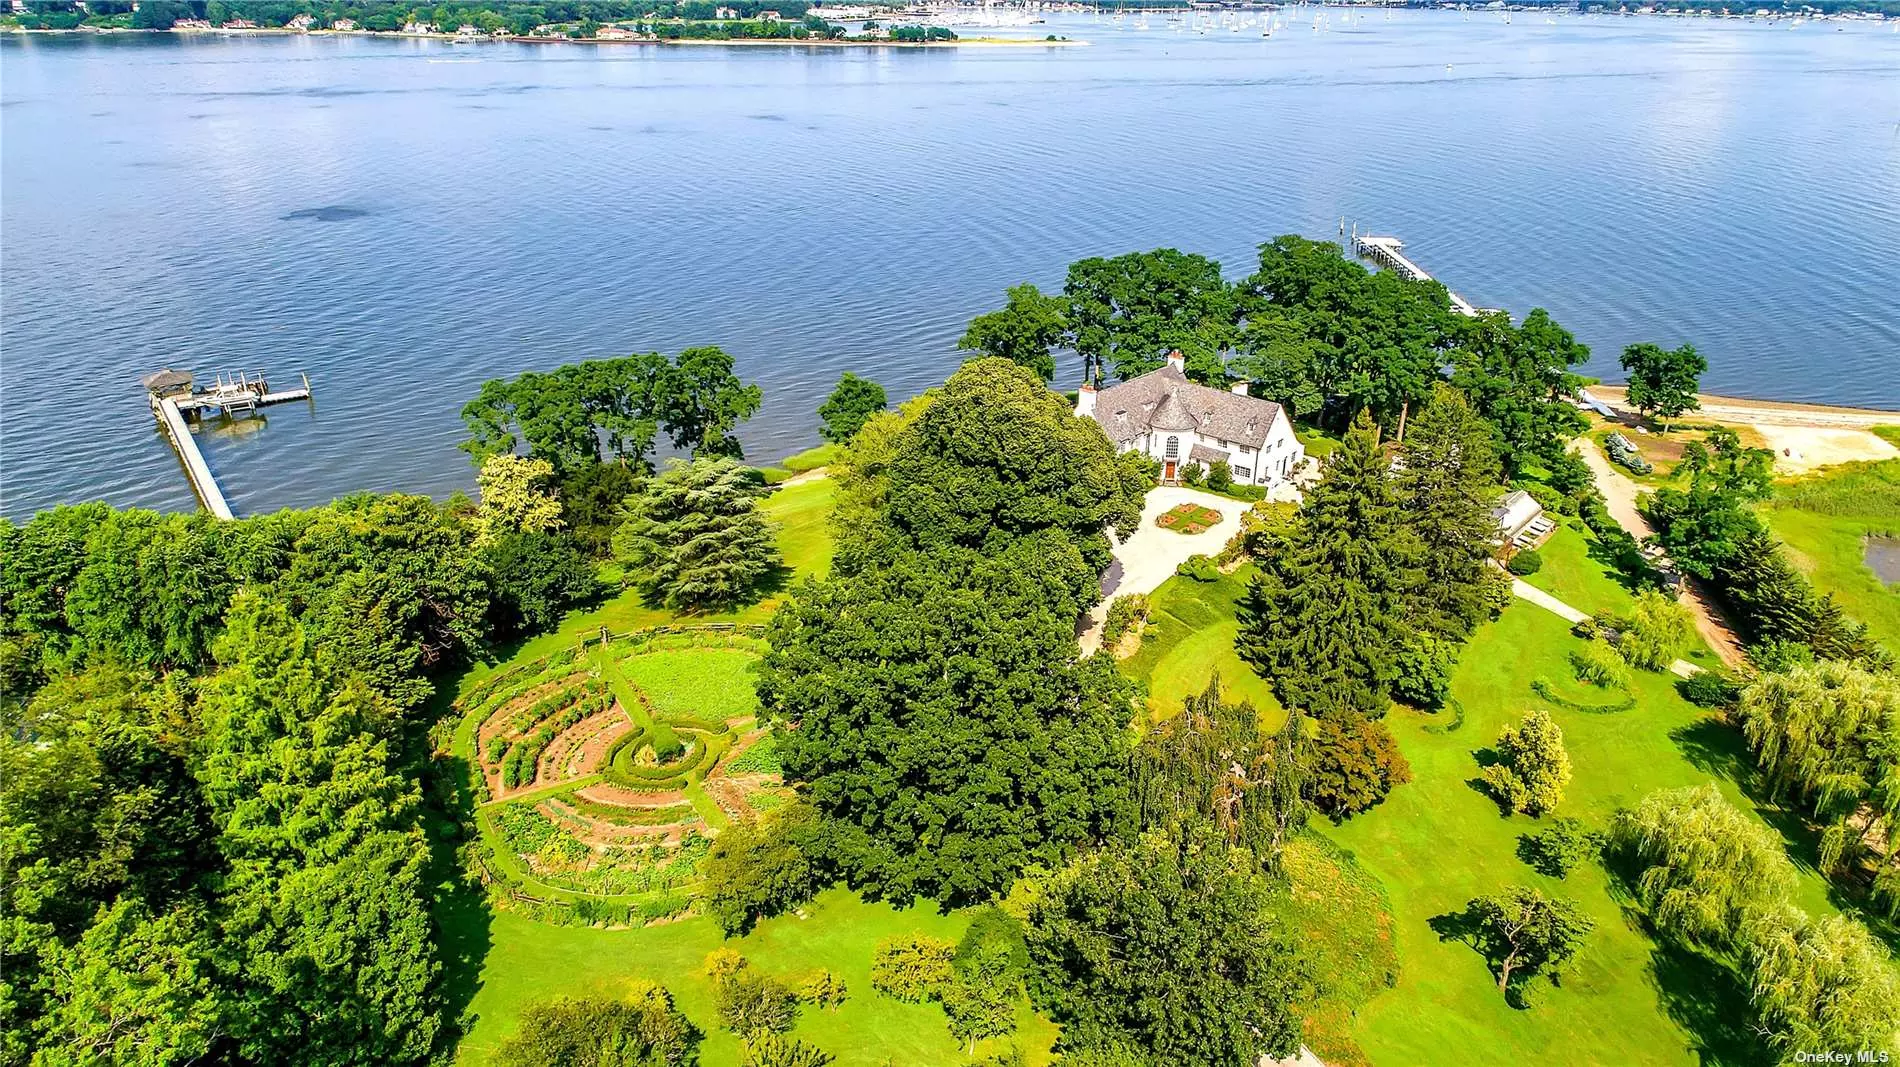 A spectacular waterfront property spanning 1.38 acres with 150 ft of water frontage and a spectacular sandy beach.